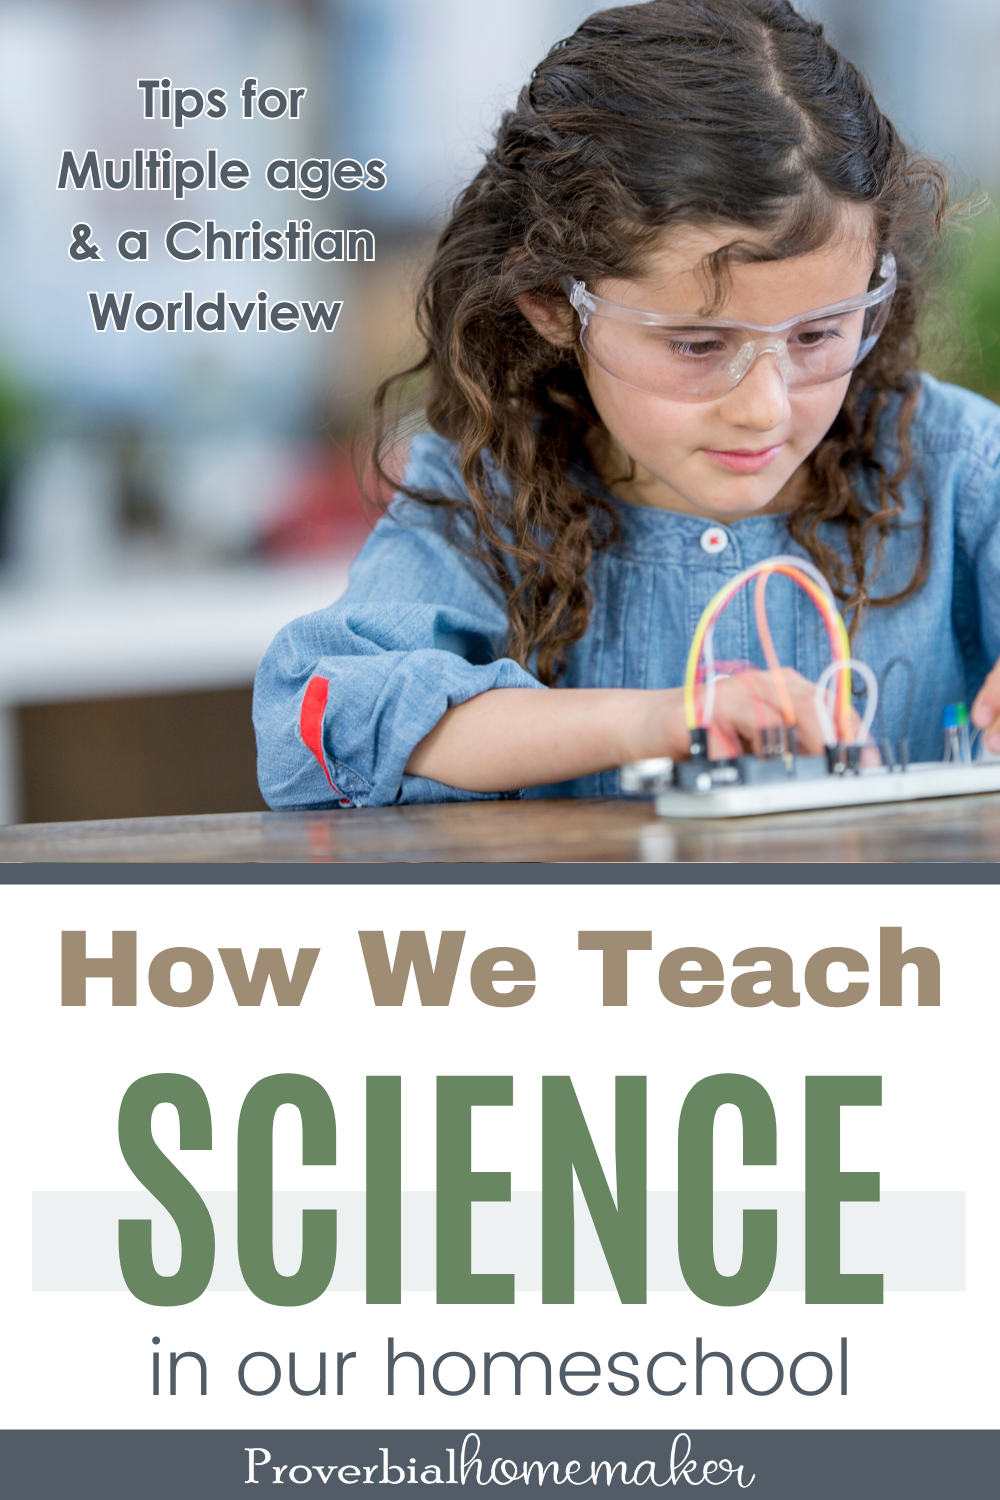 How a mom of 6 teaches homeschool science (with a biblical worldview)